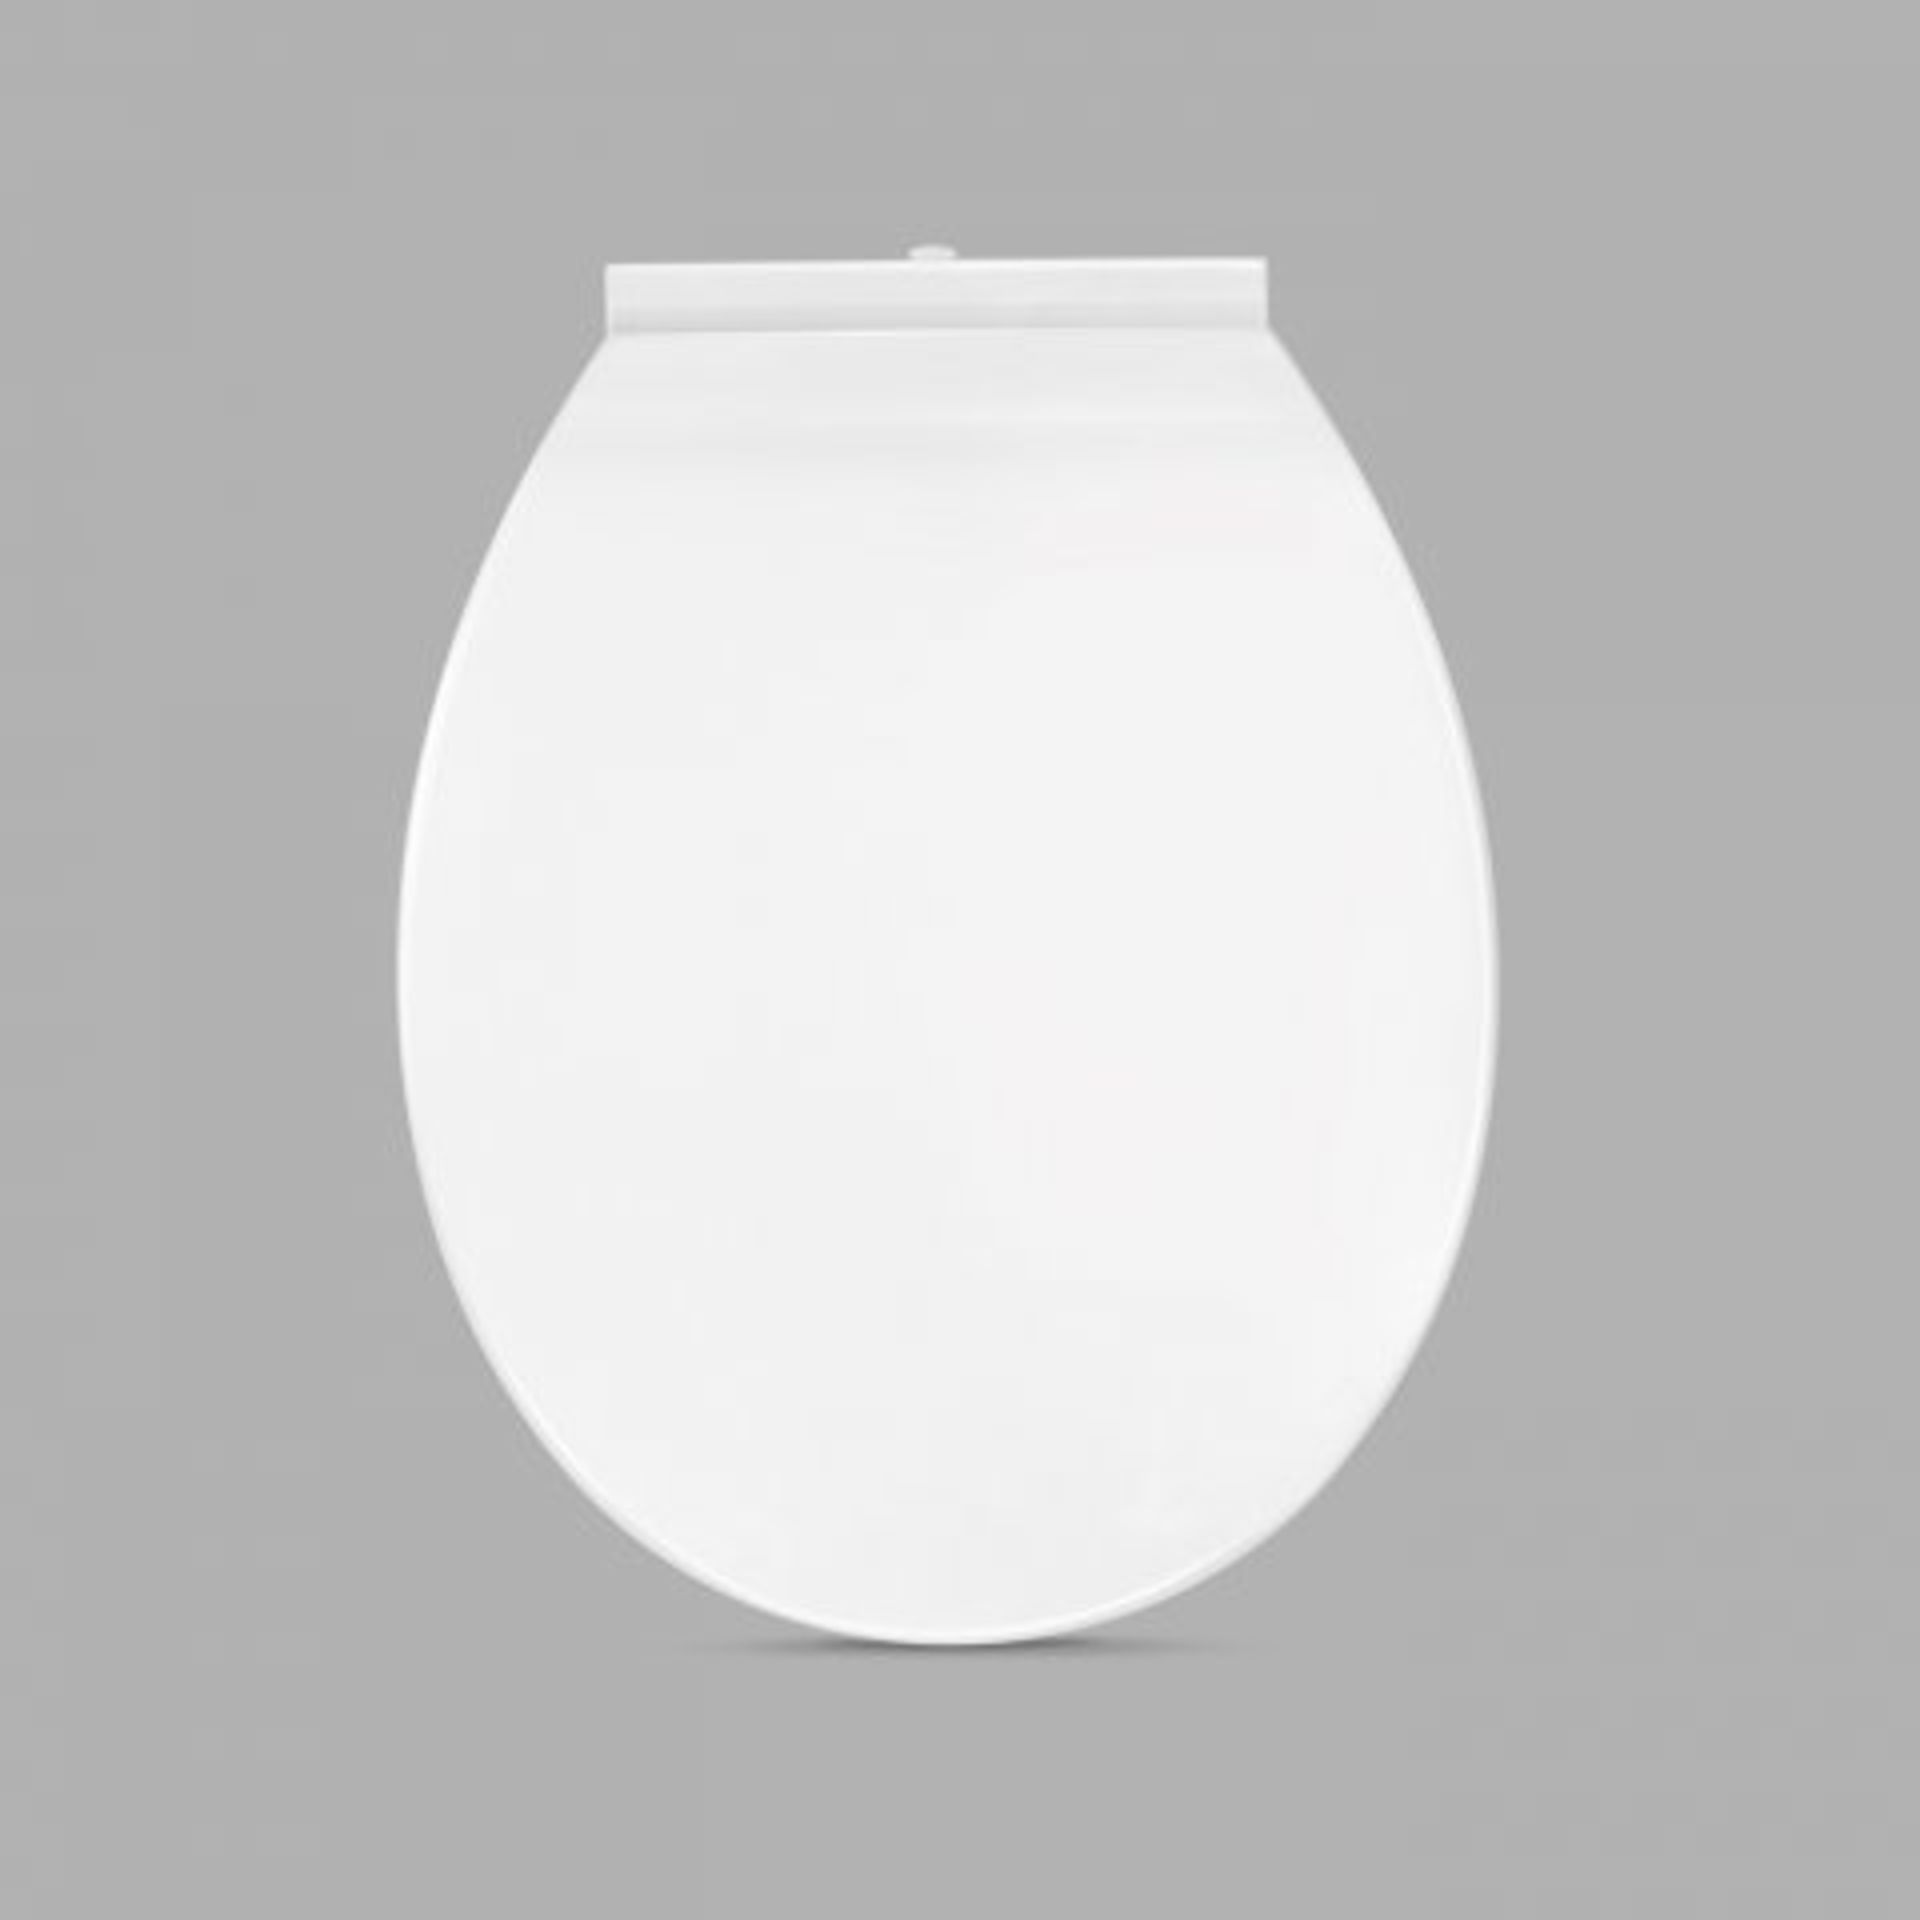 (AA45) Crosby Toilet Seat - Soft Closing Our luxury Crosby Soft Close Toilet Seat is provided with